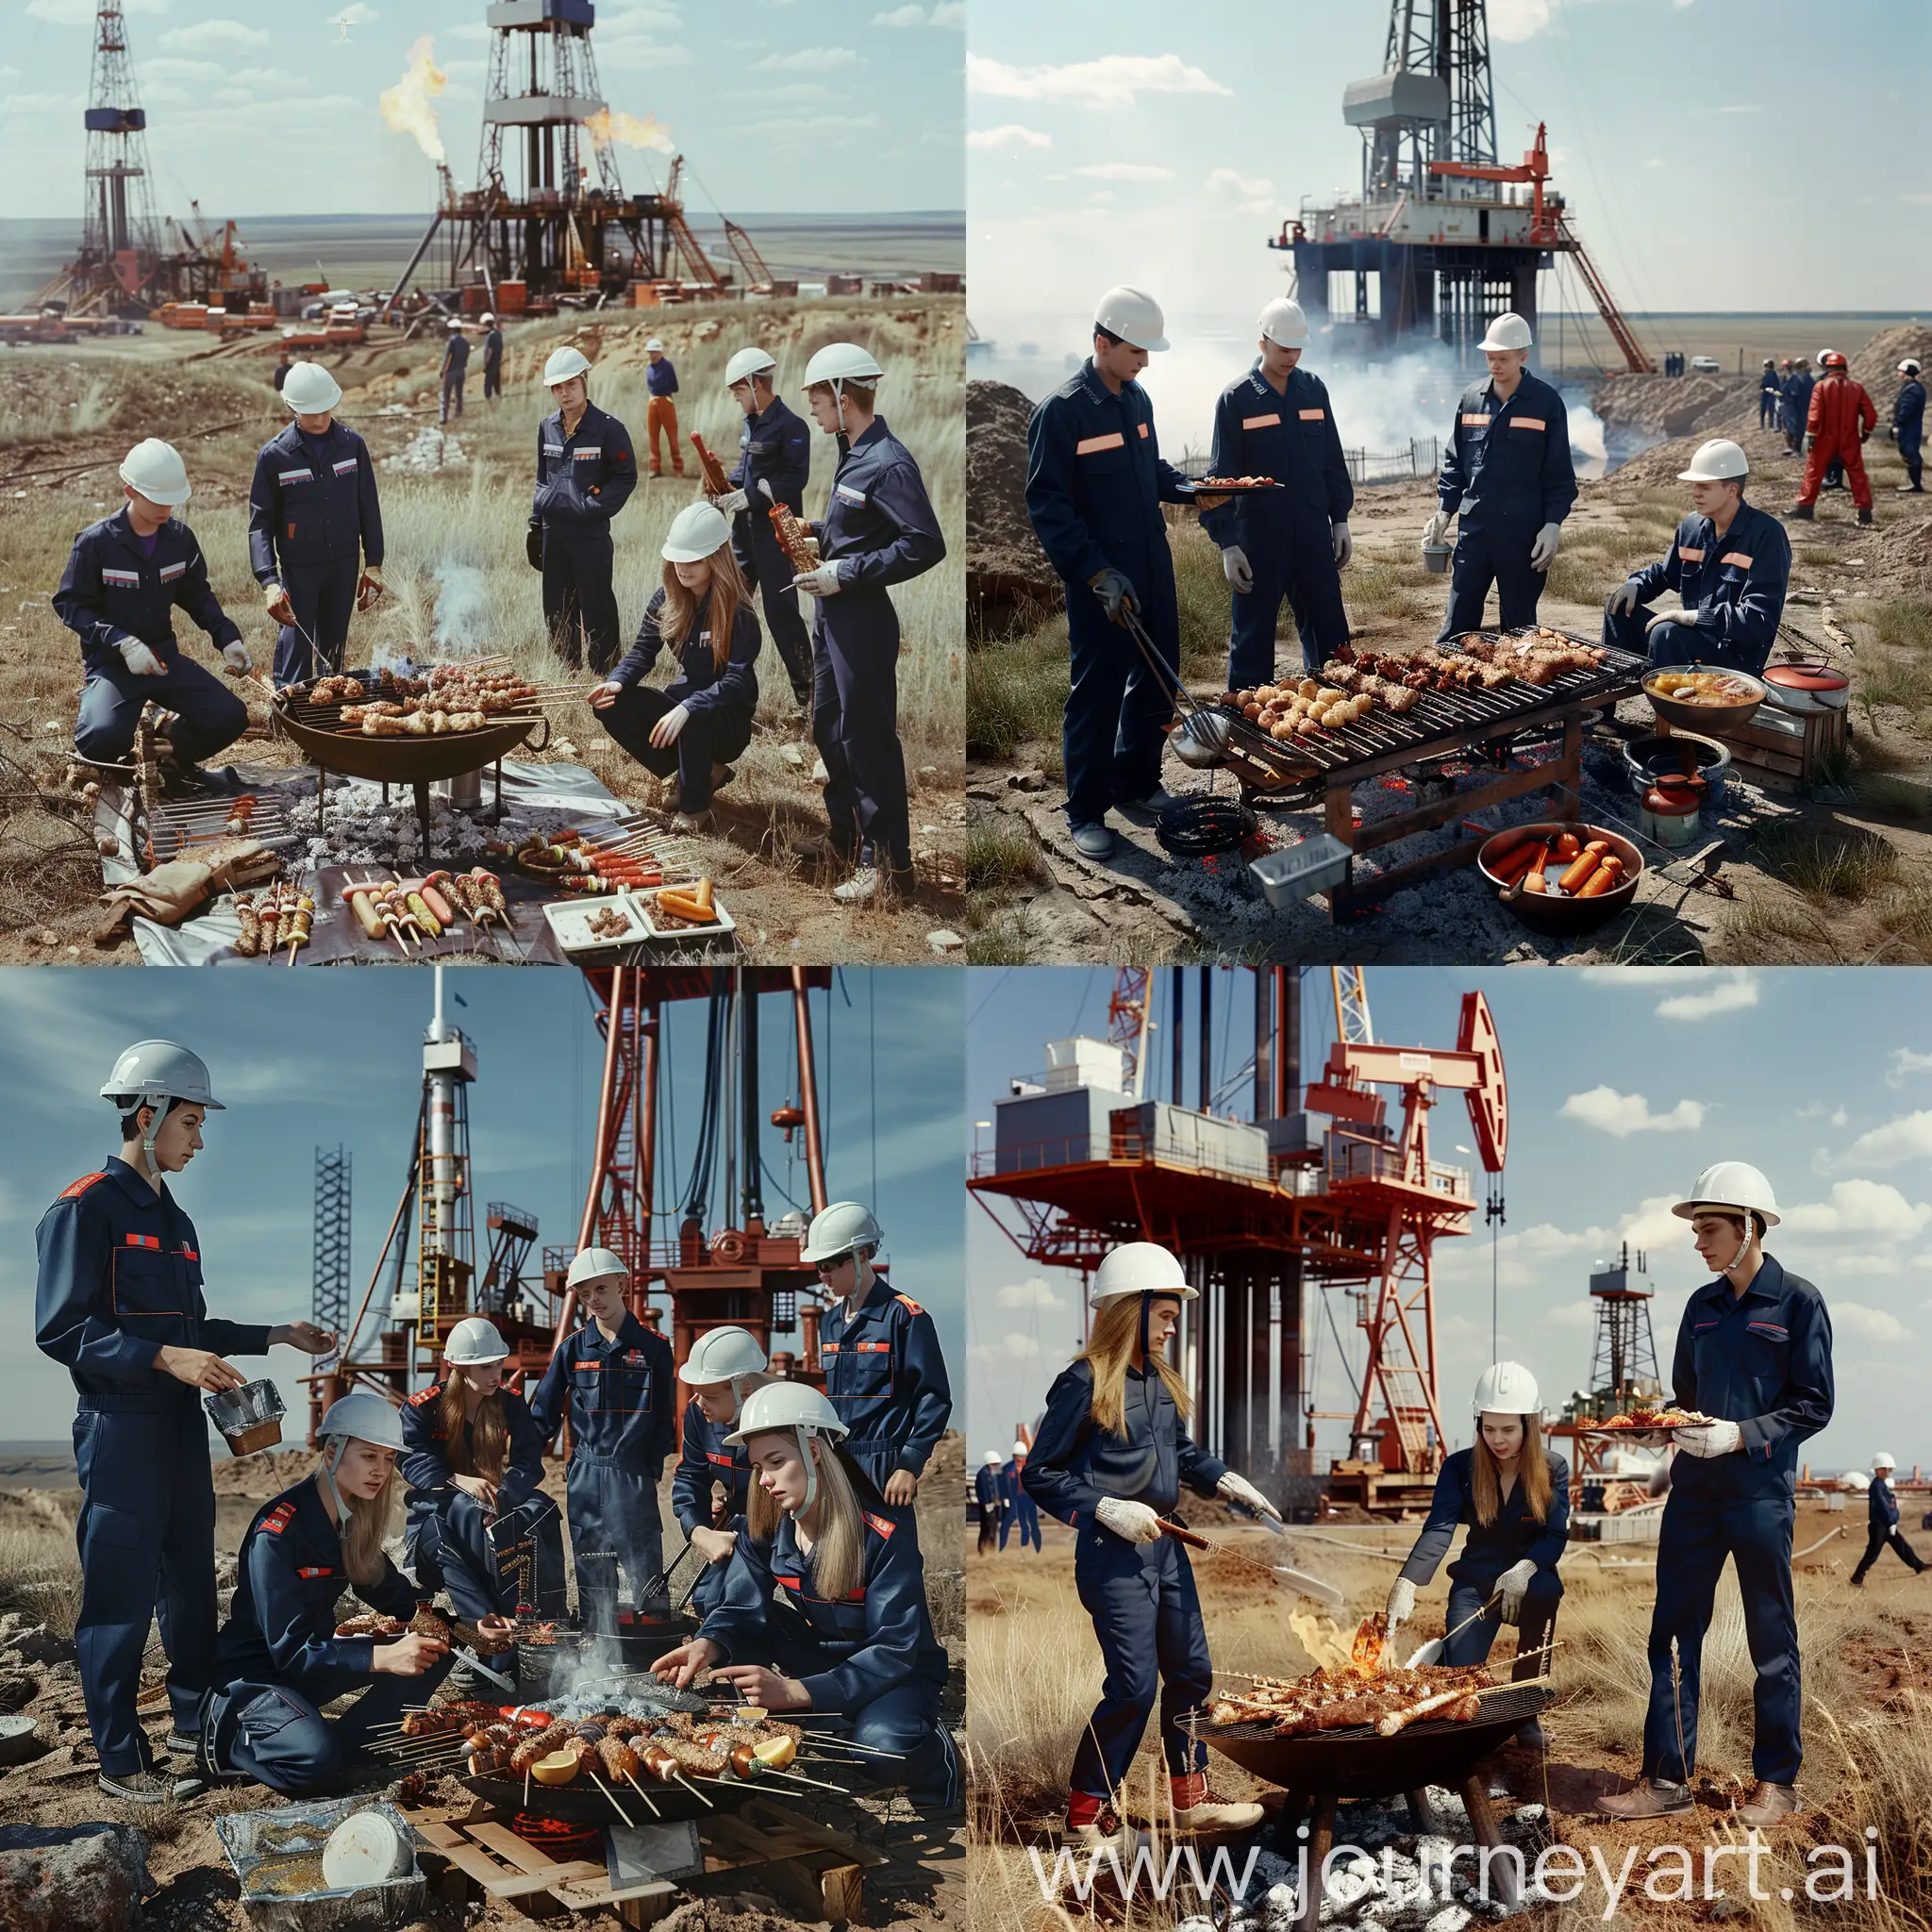 Young-Oil-Workers-Barbecue-Picnic-in-Russian-Steppe